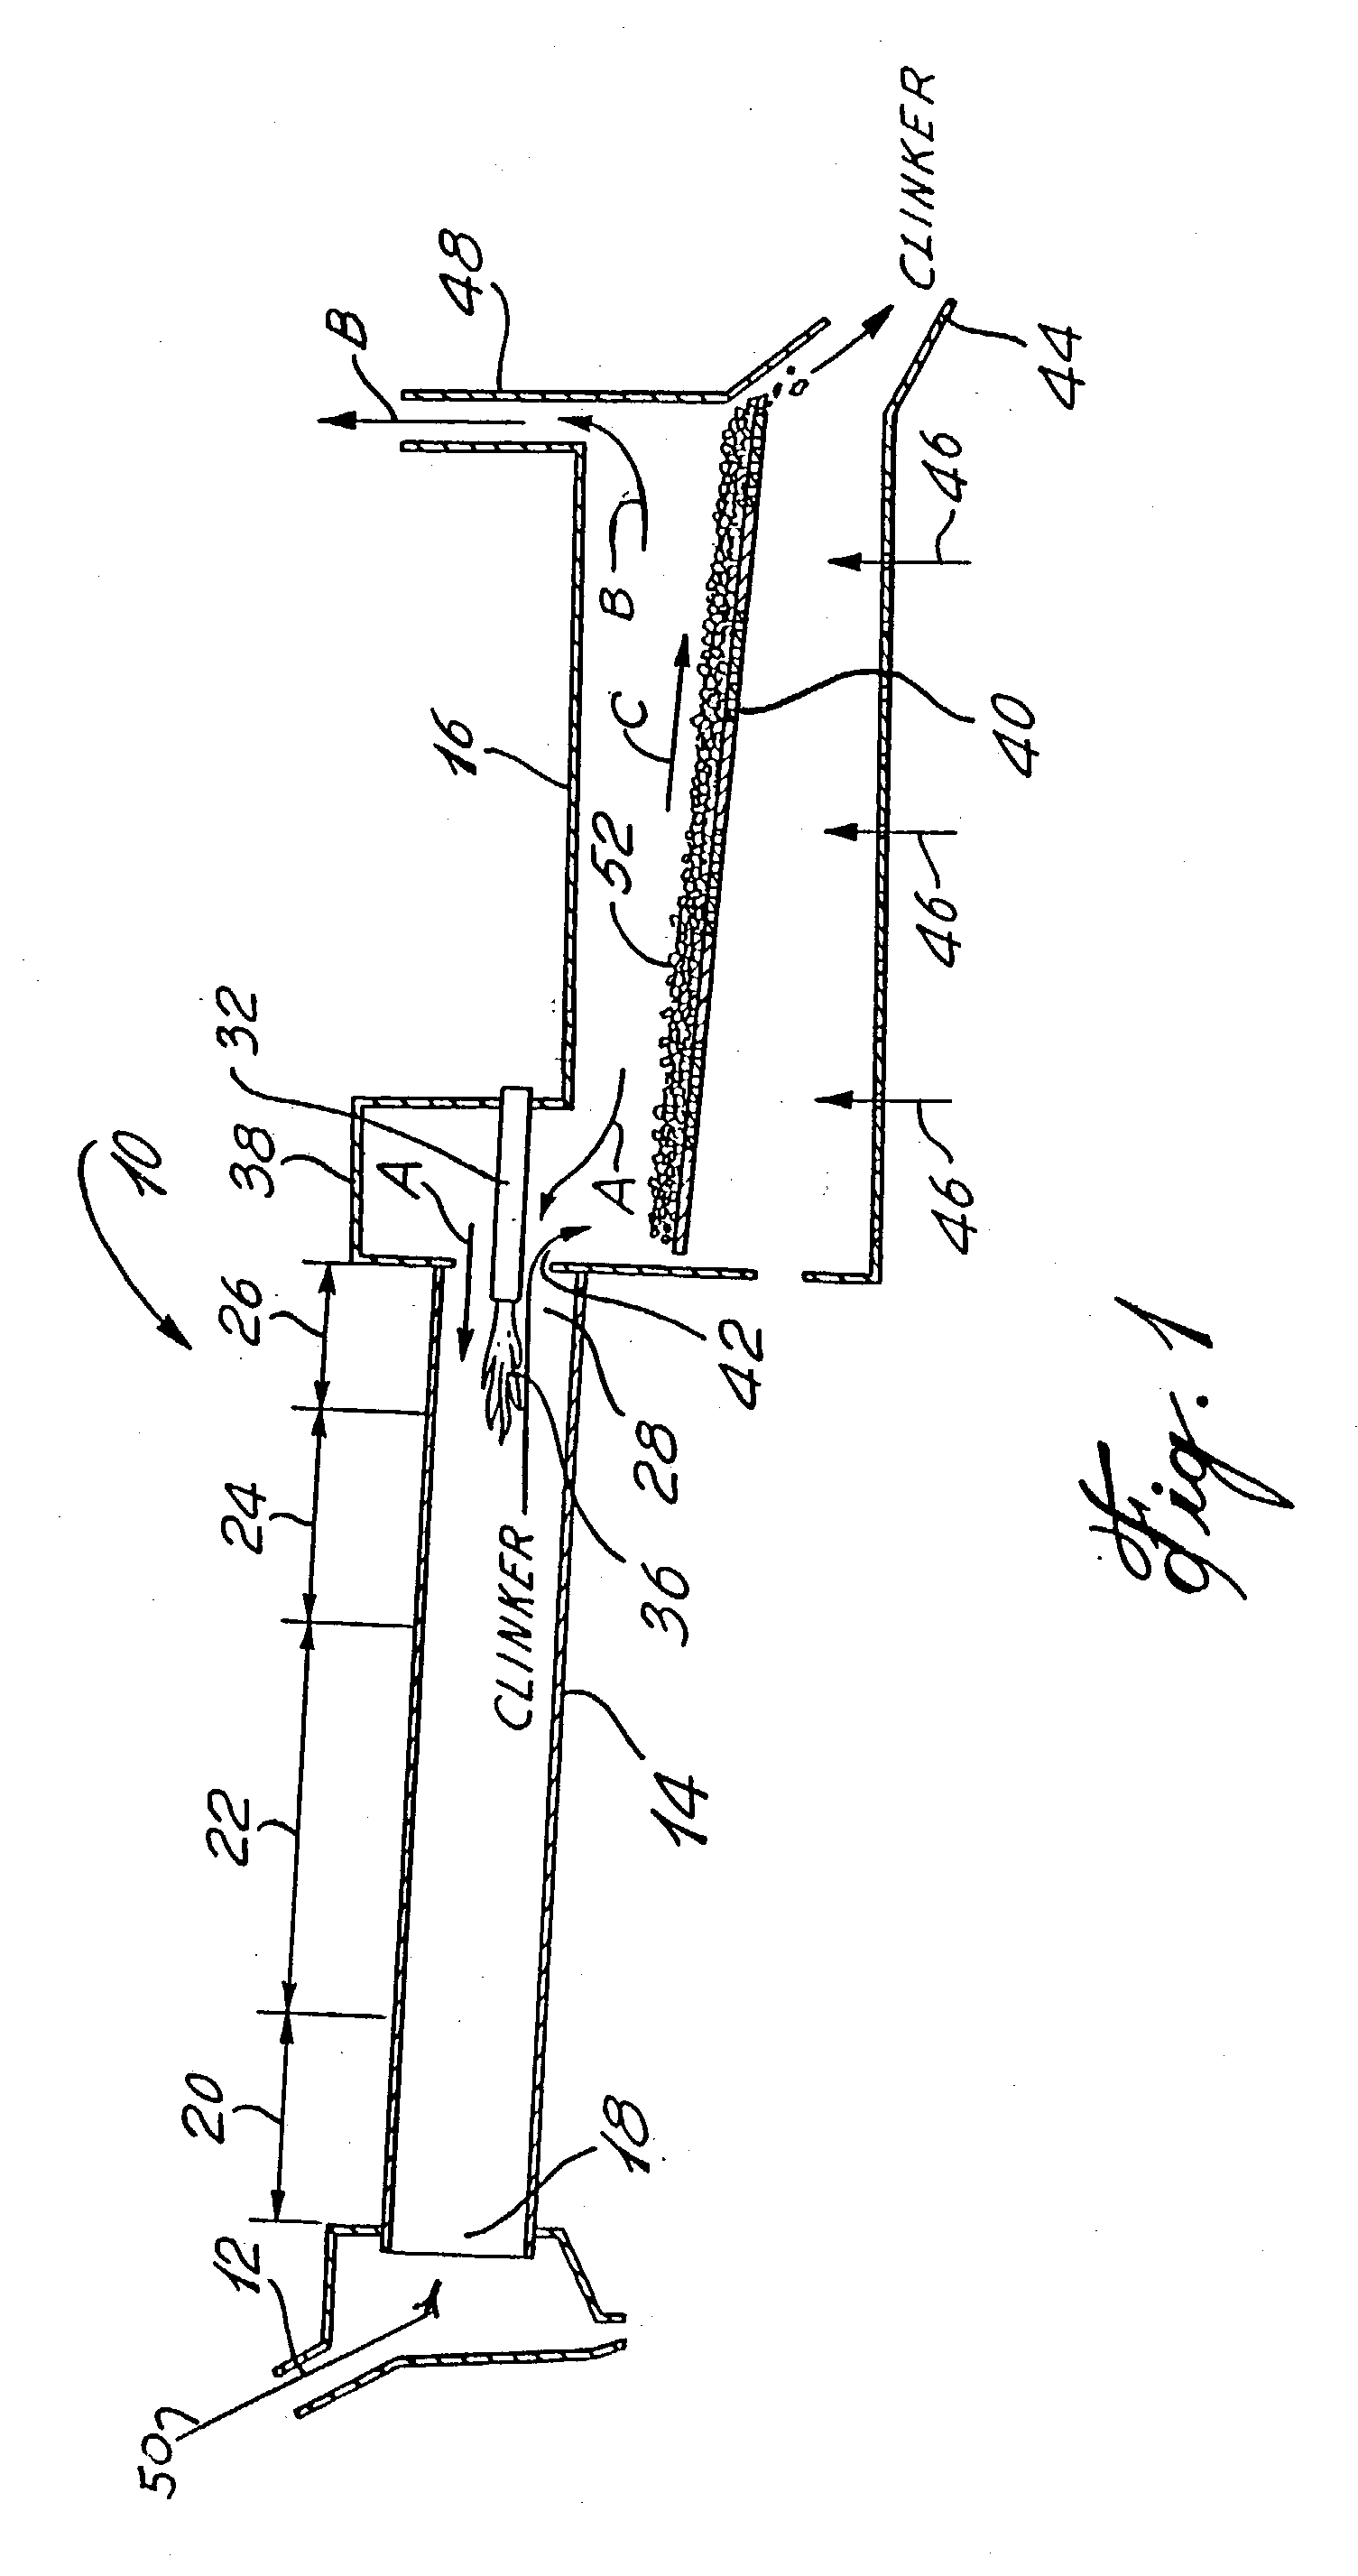 Process for incorporating coal ash into cement clinker